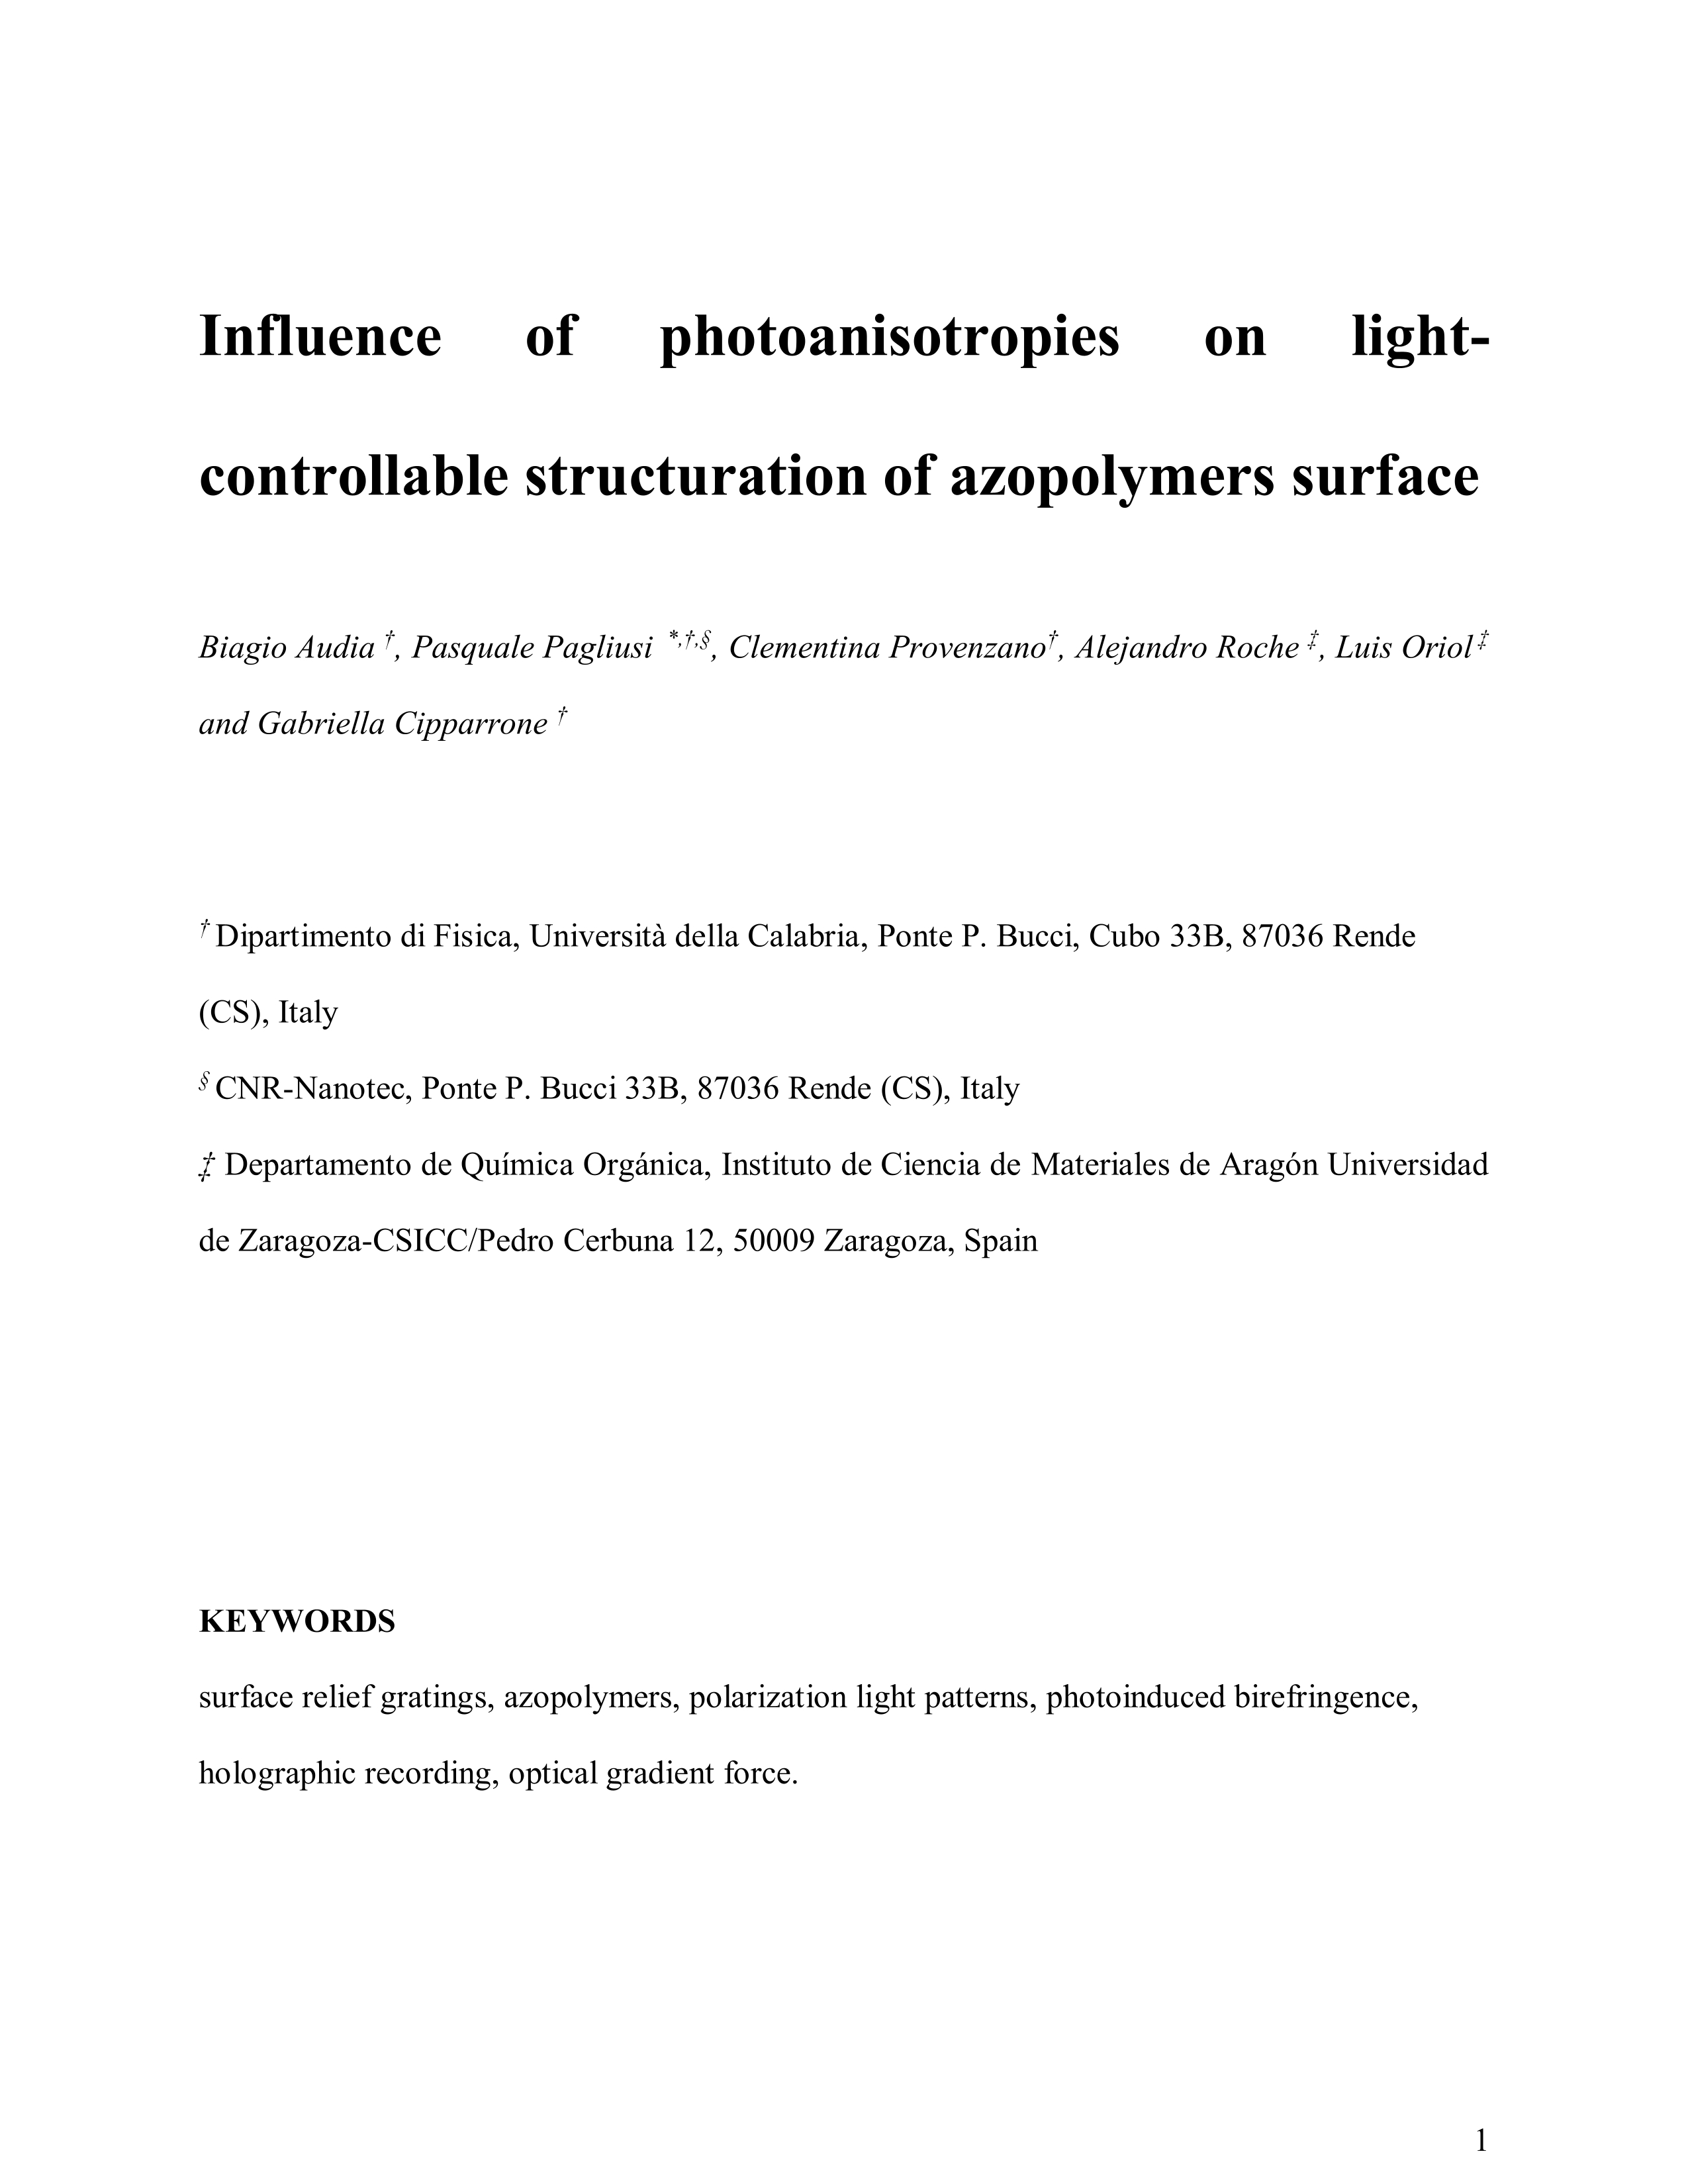 Influence of photoanisotropies on light-controllable structuration of azopolymer surface